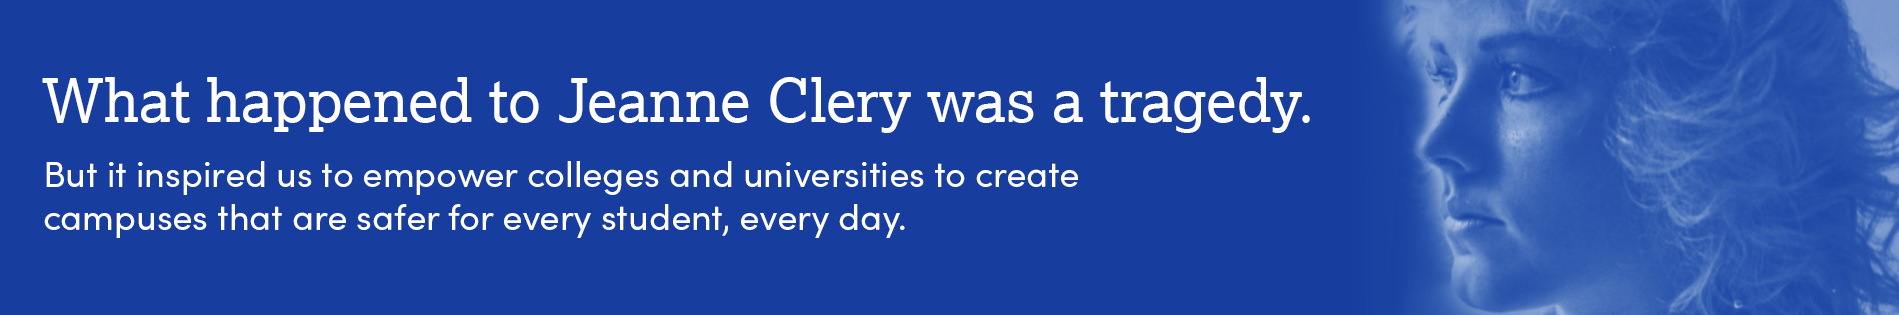 Text on an image of Jeanne Clery. "What happened to Jeanne Clery was a tragedy. But it inspired us to empower colleges and universities to create campuses that are safer for every student, every day.